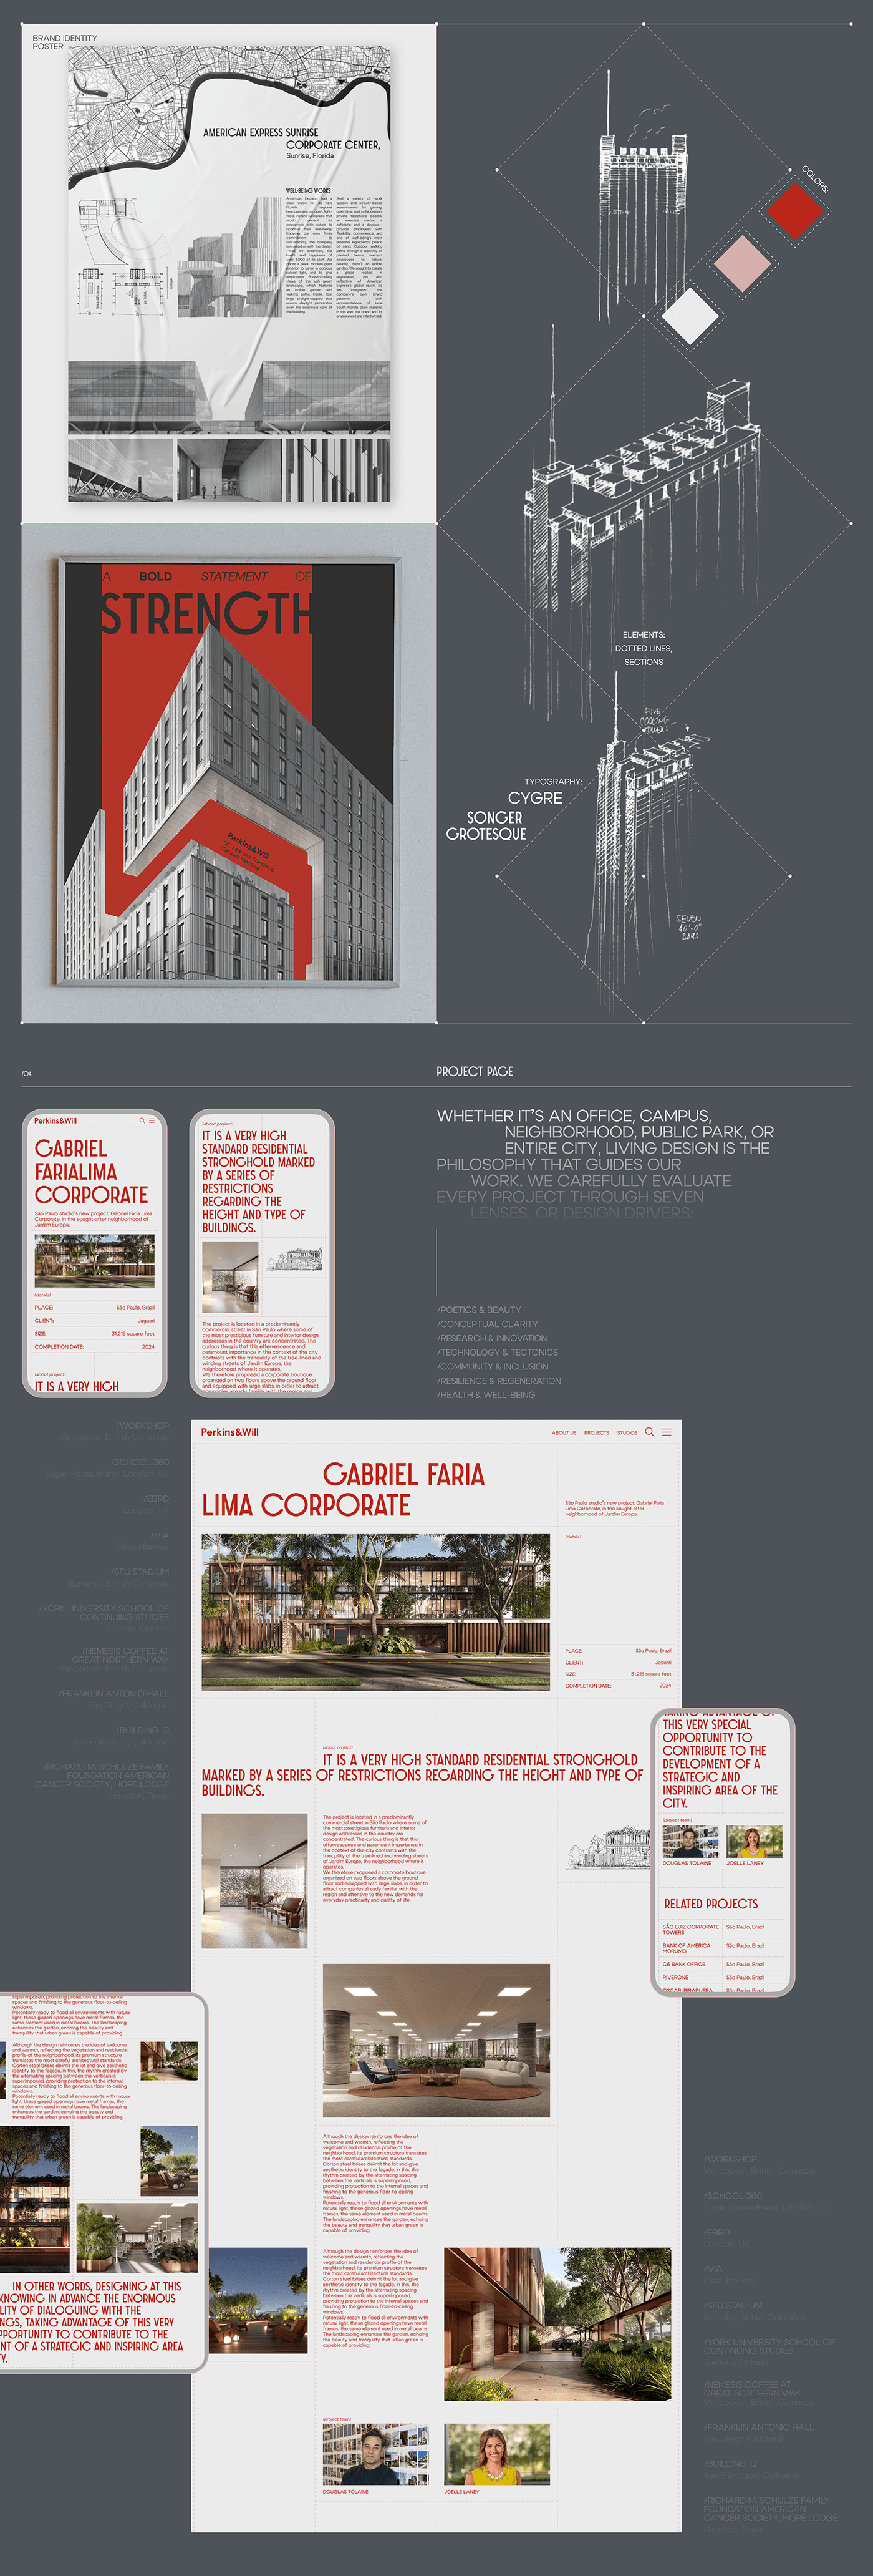 user interface user experience Webdesign Figma design ux/ui graphic design  typography   Poster Design